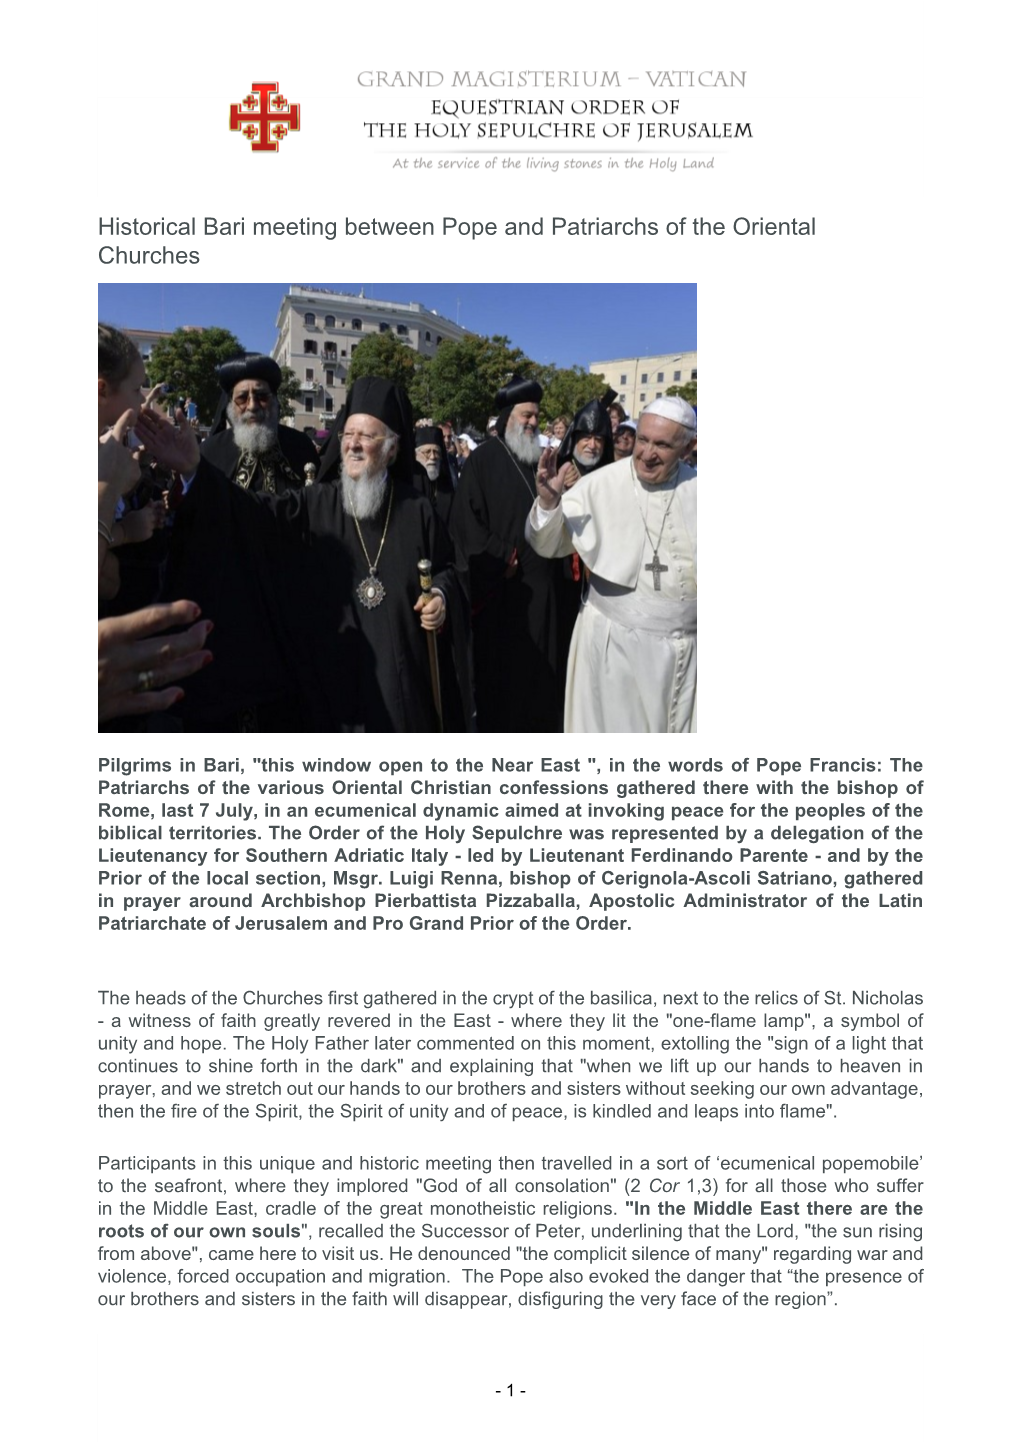 Historical Bari Meeting Between Pope and Patriarchs of the Oriental Churches